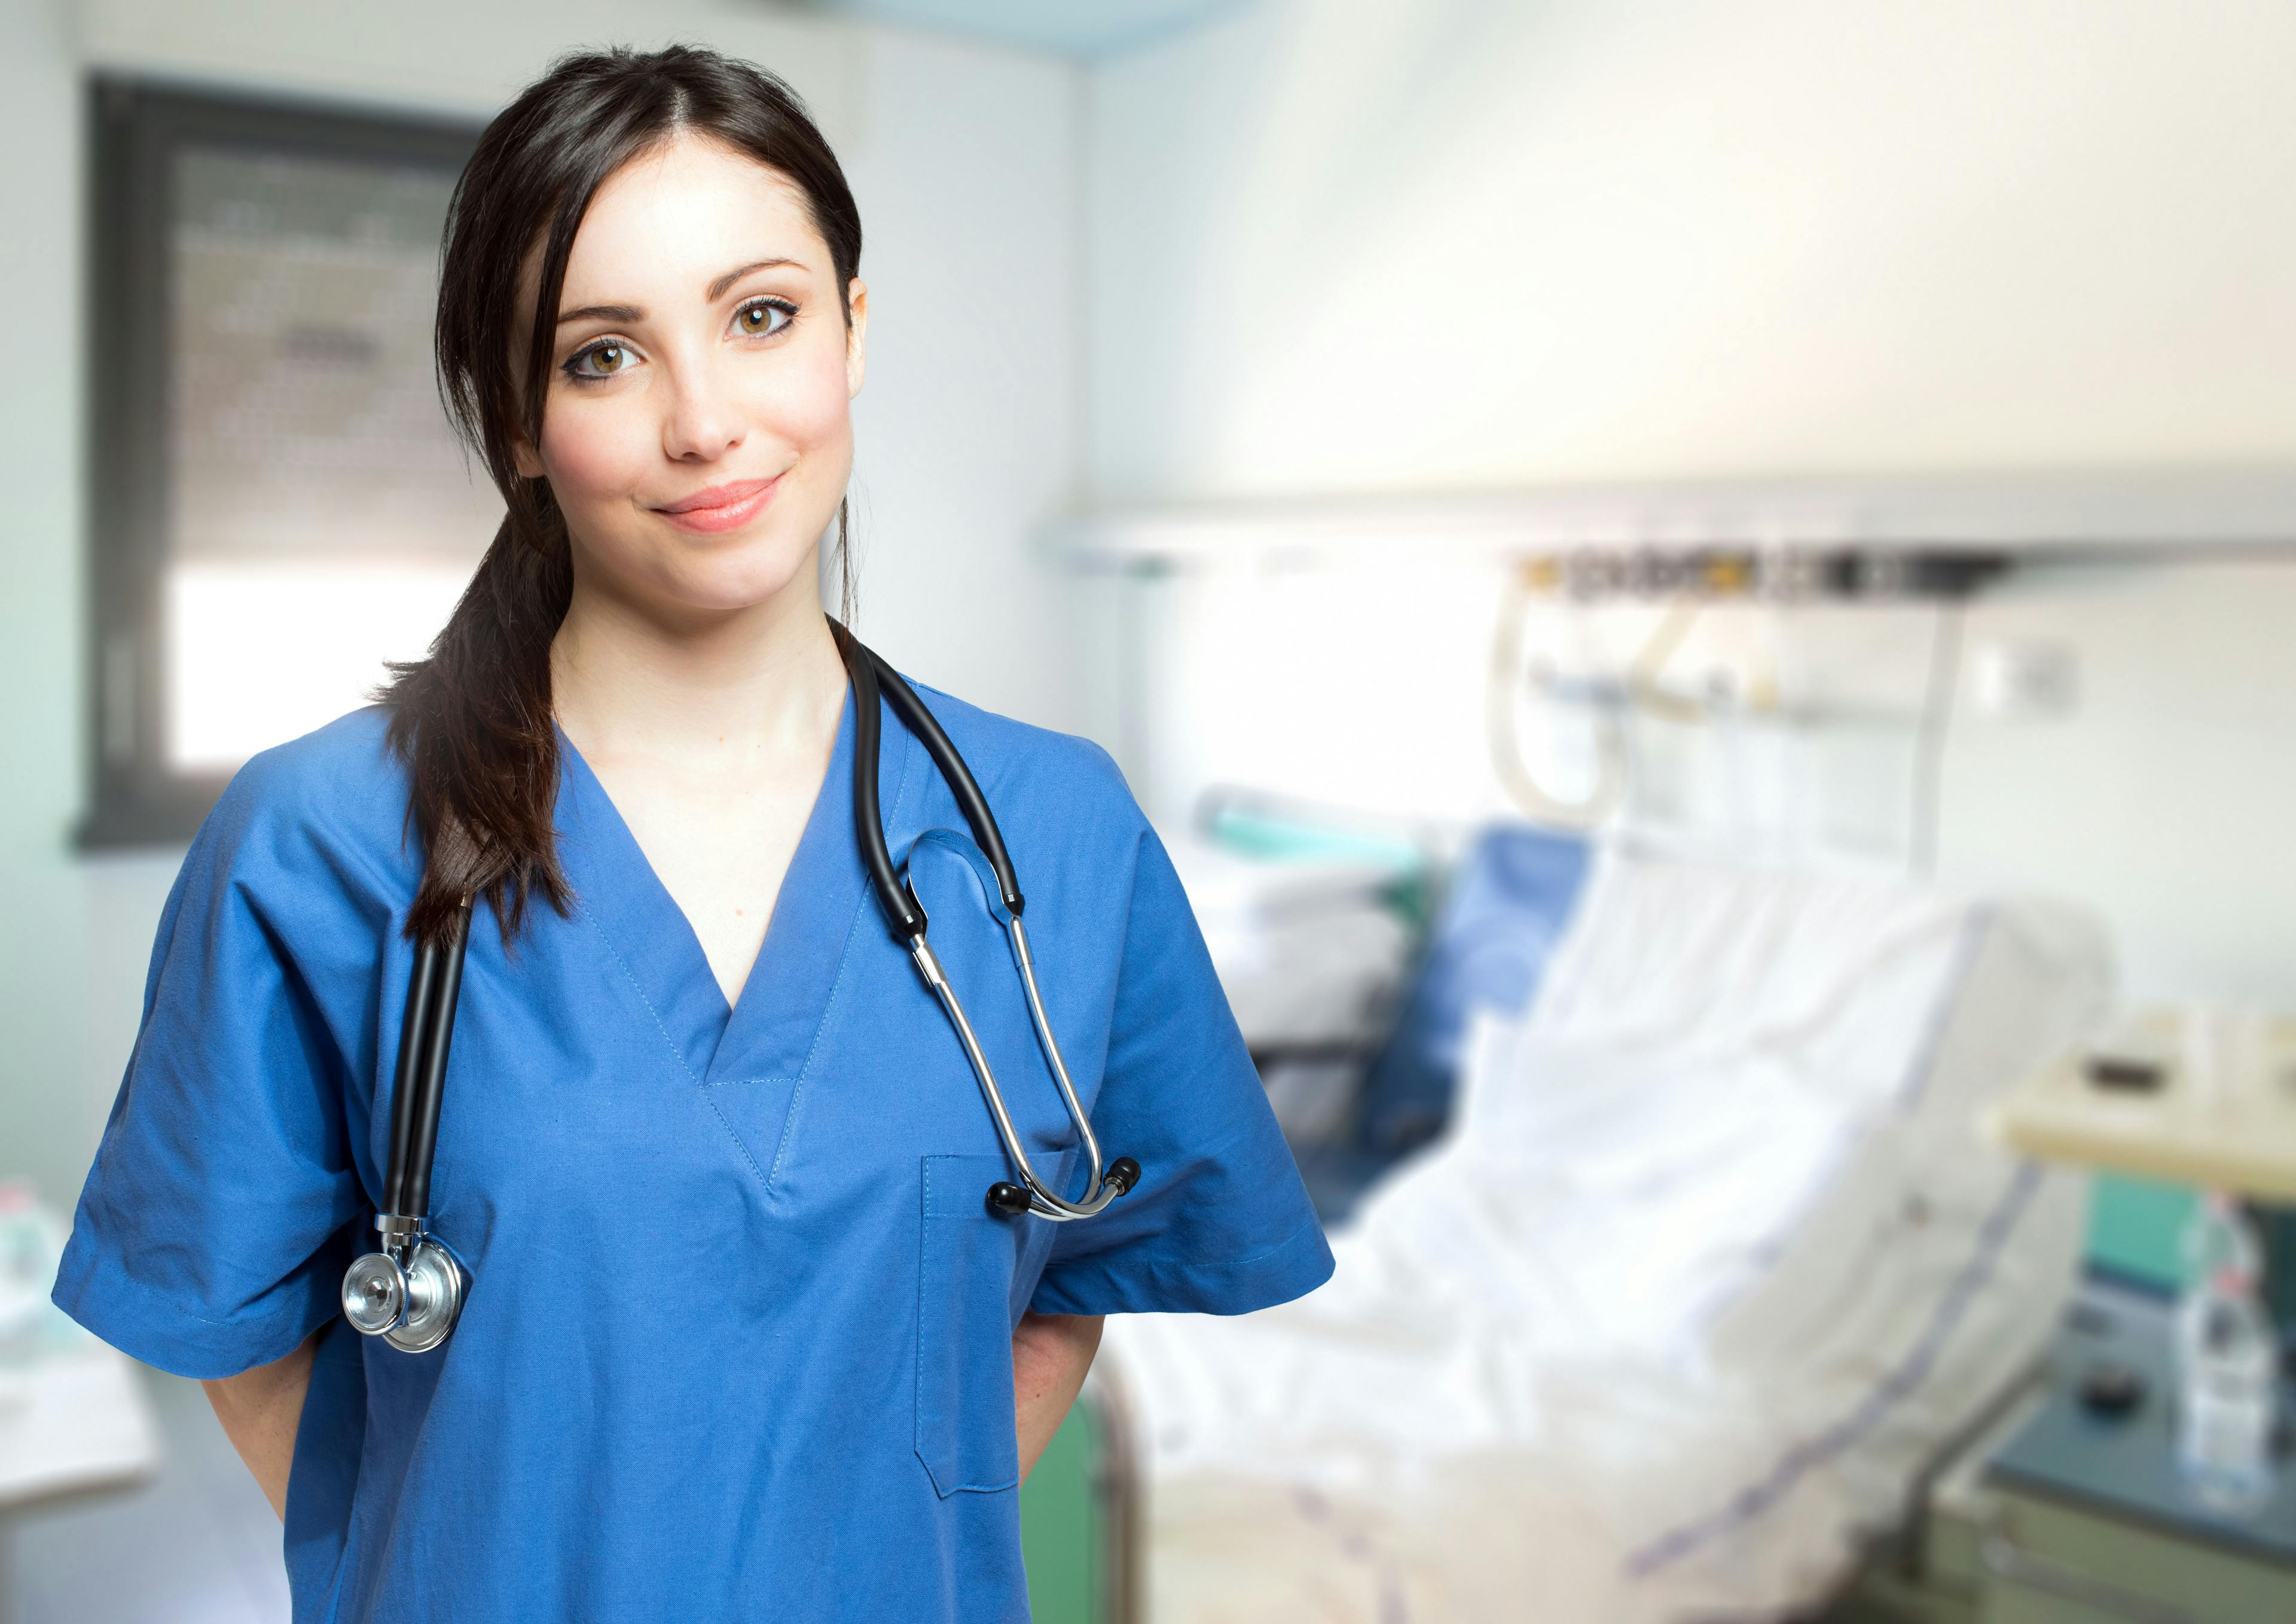 Many nurses wouldn’t recommend the profession, survey says